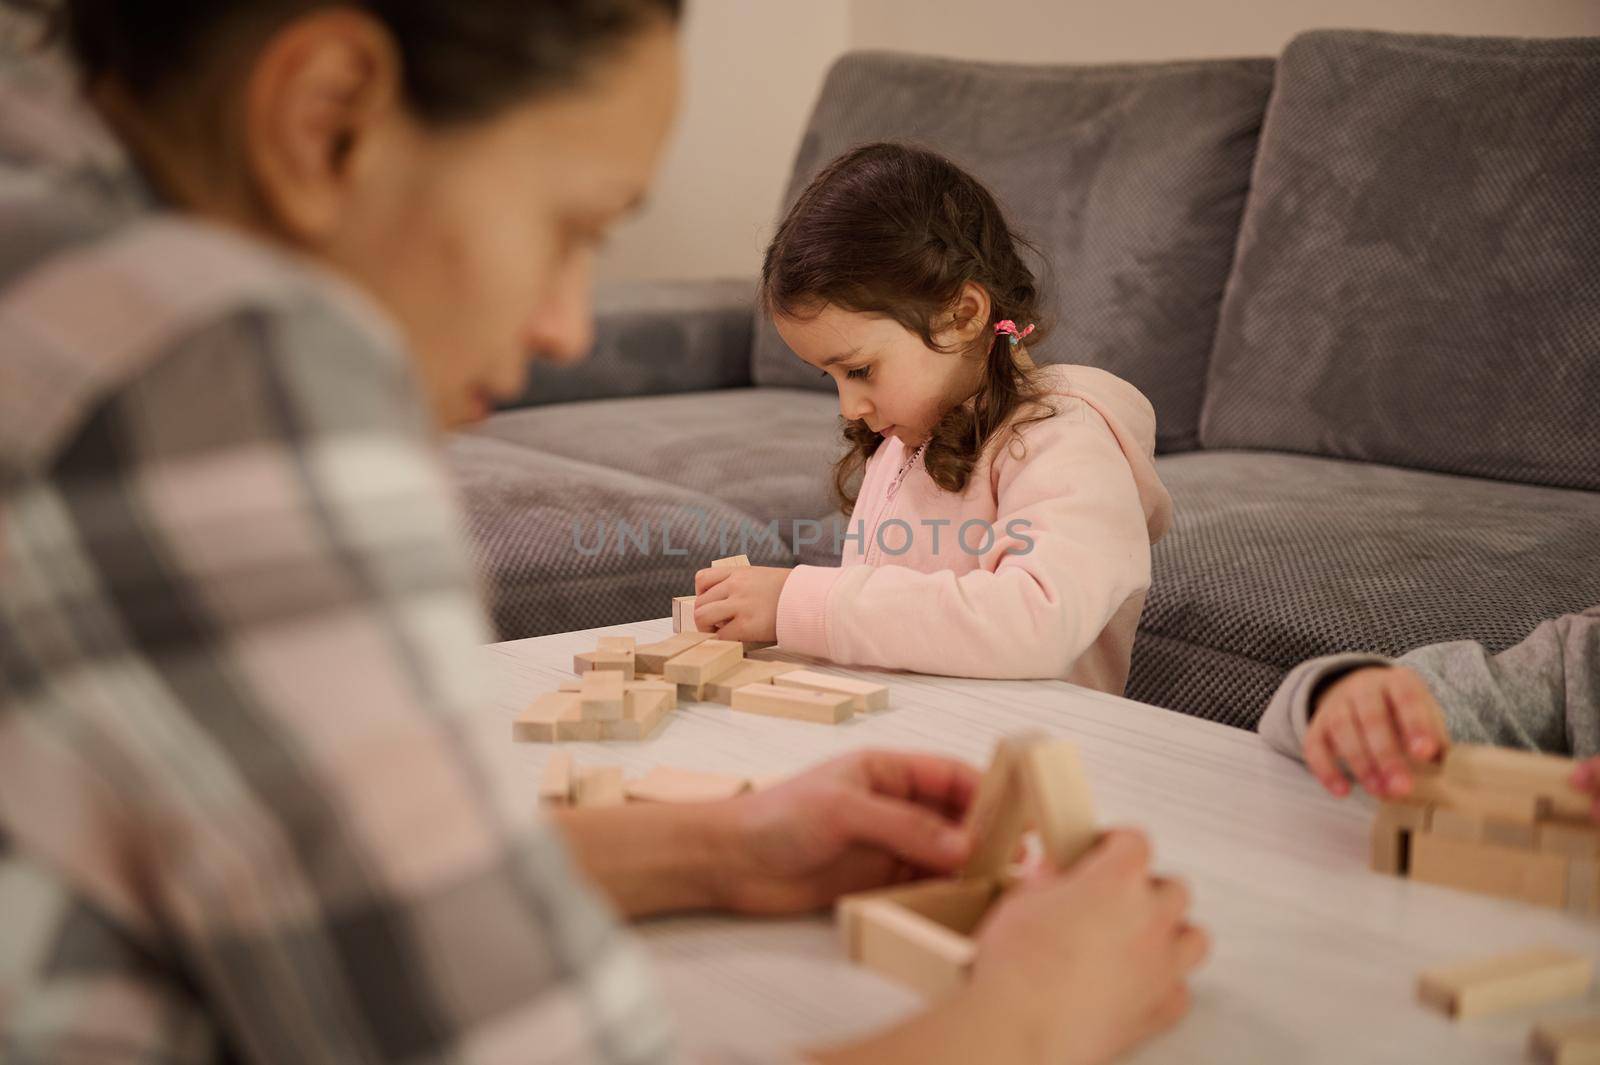 Concentrated little Caucasian girl builds constructions with wooden blocks, developing her fine motor skills, sitting at table with her blurred mother on the foreground, focused on building structures by artgf